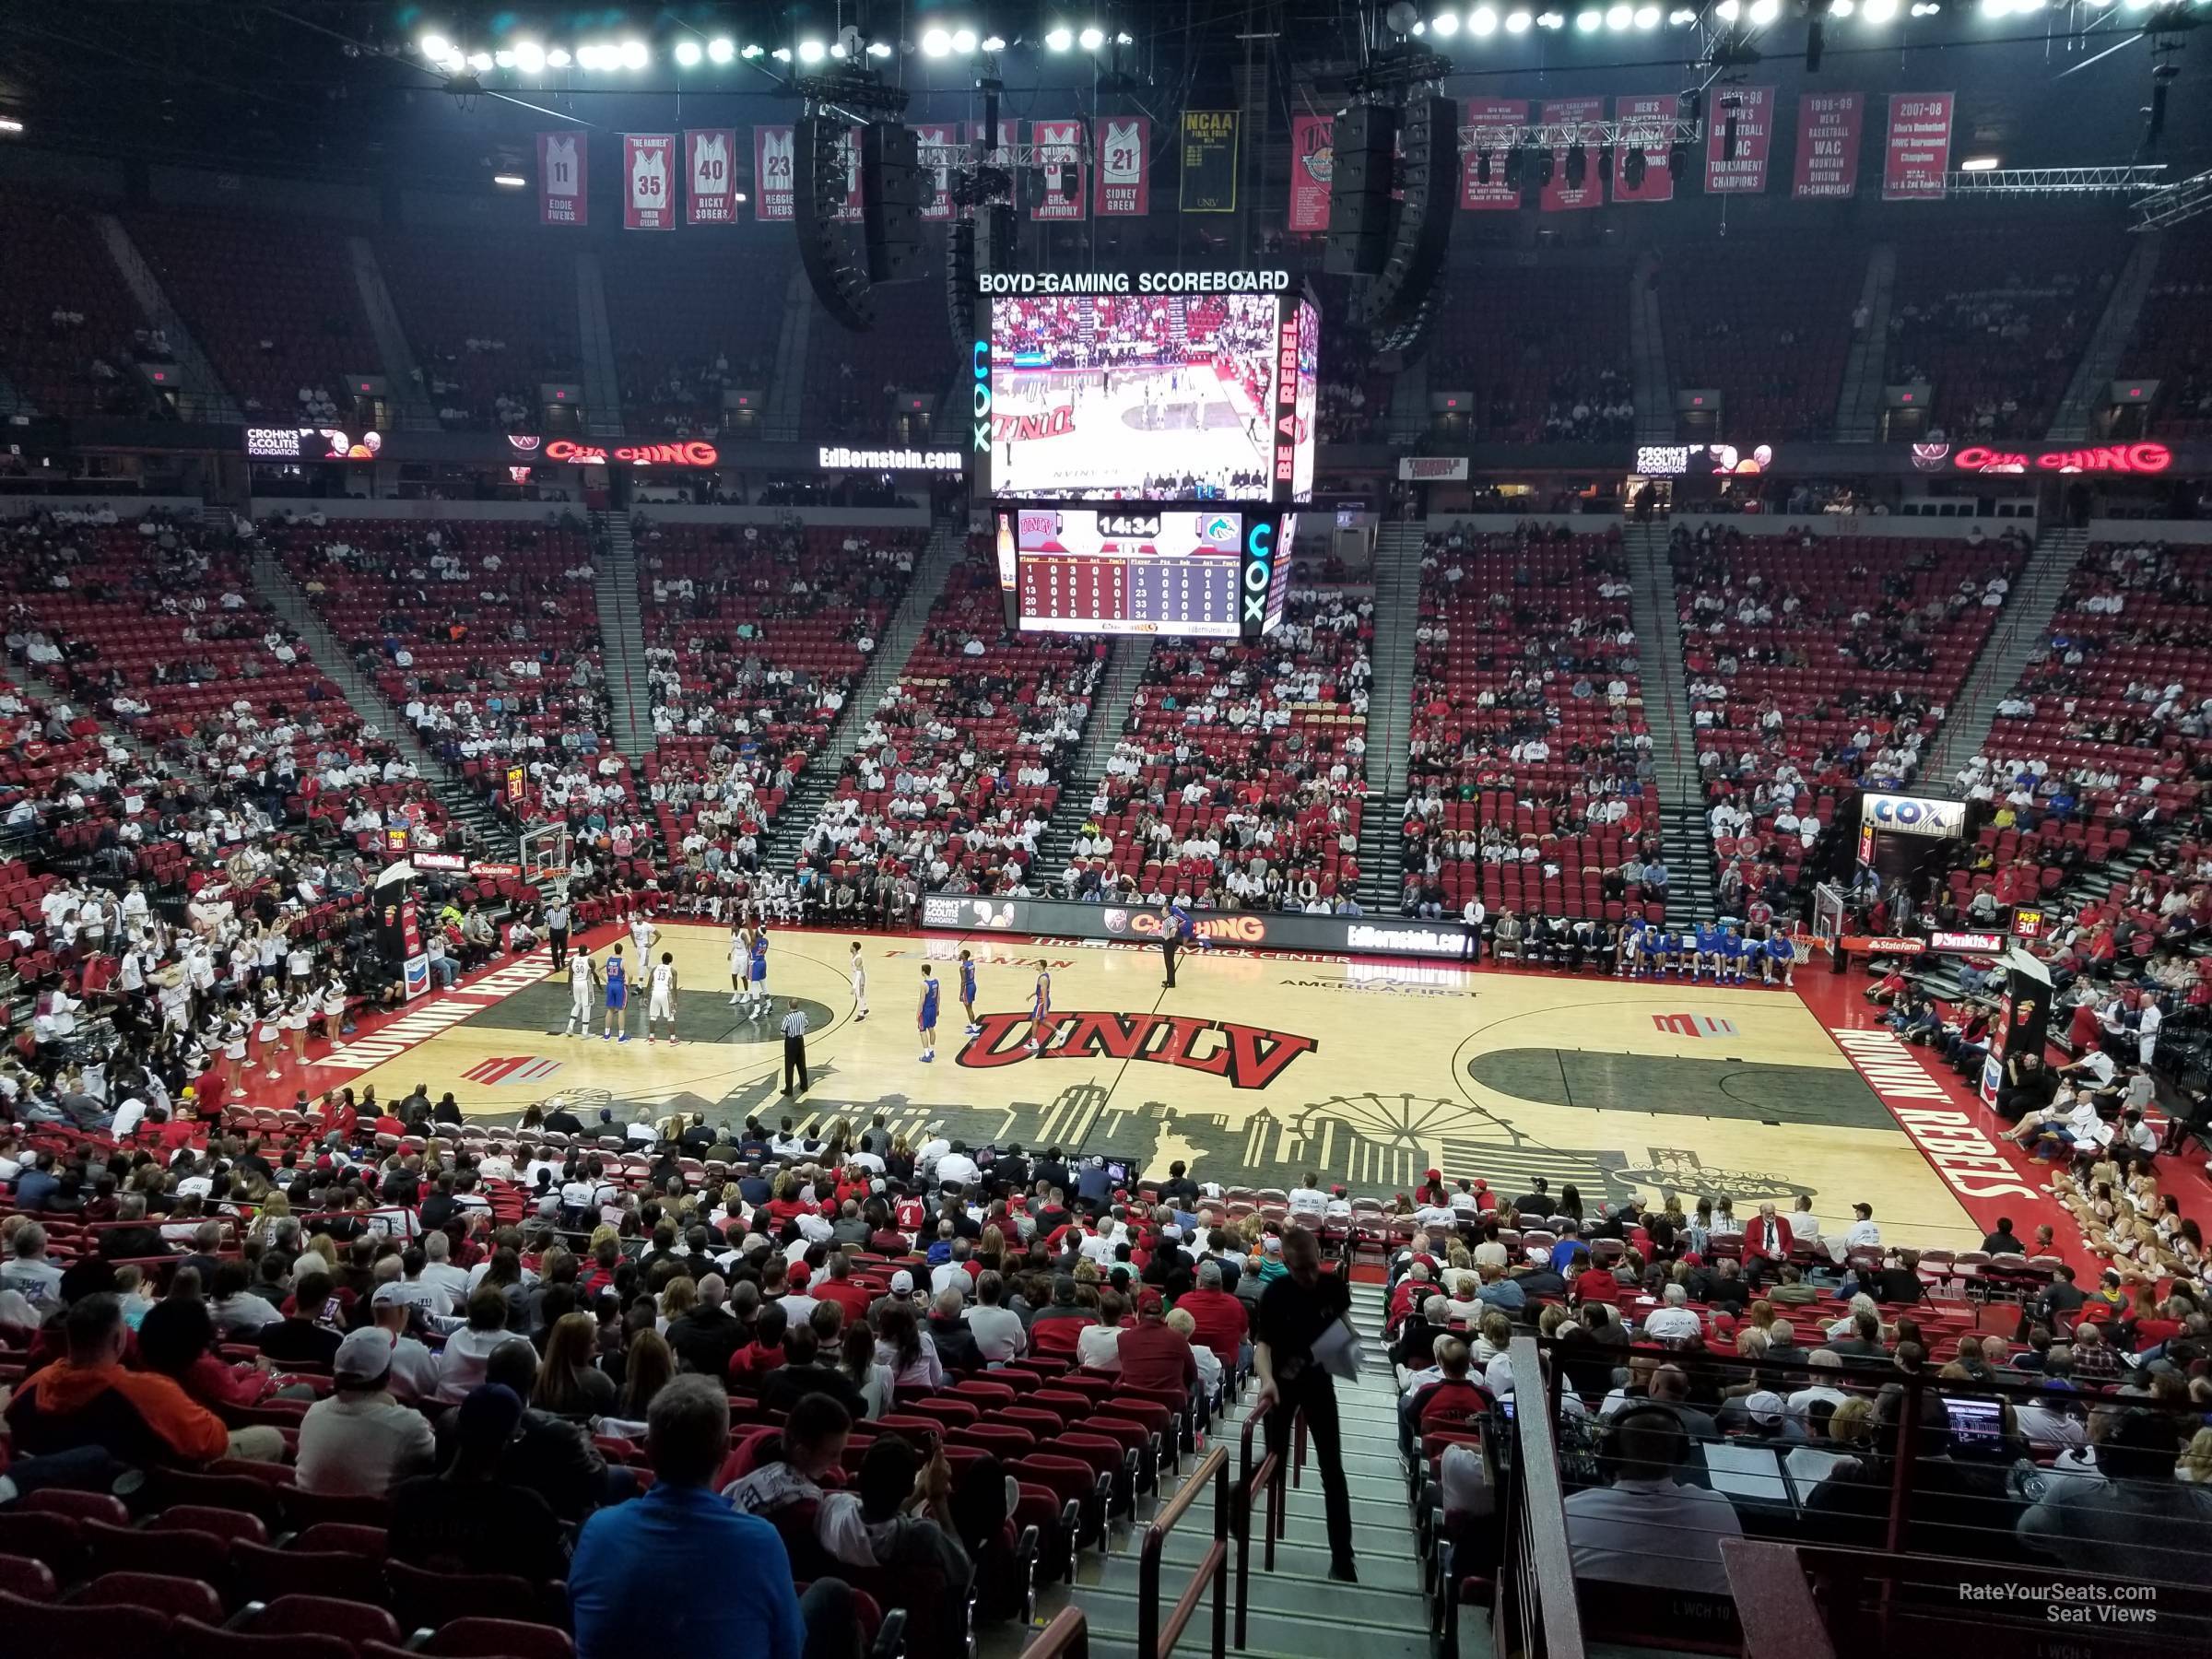 section 105, row v seat view  - thomas and mack center